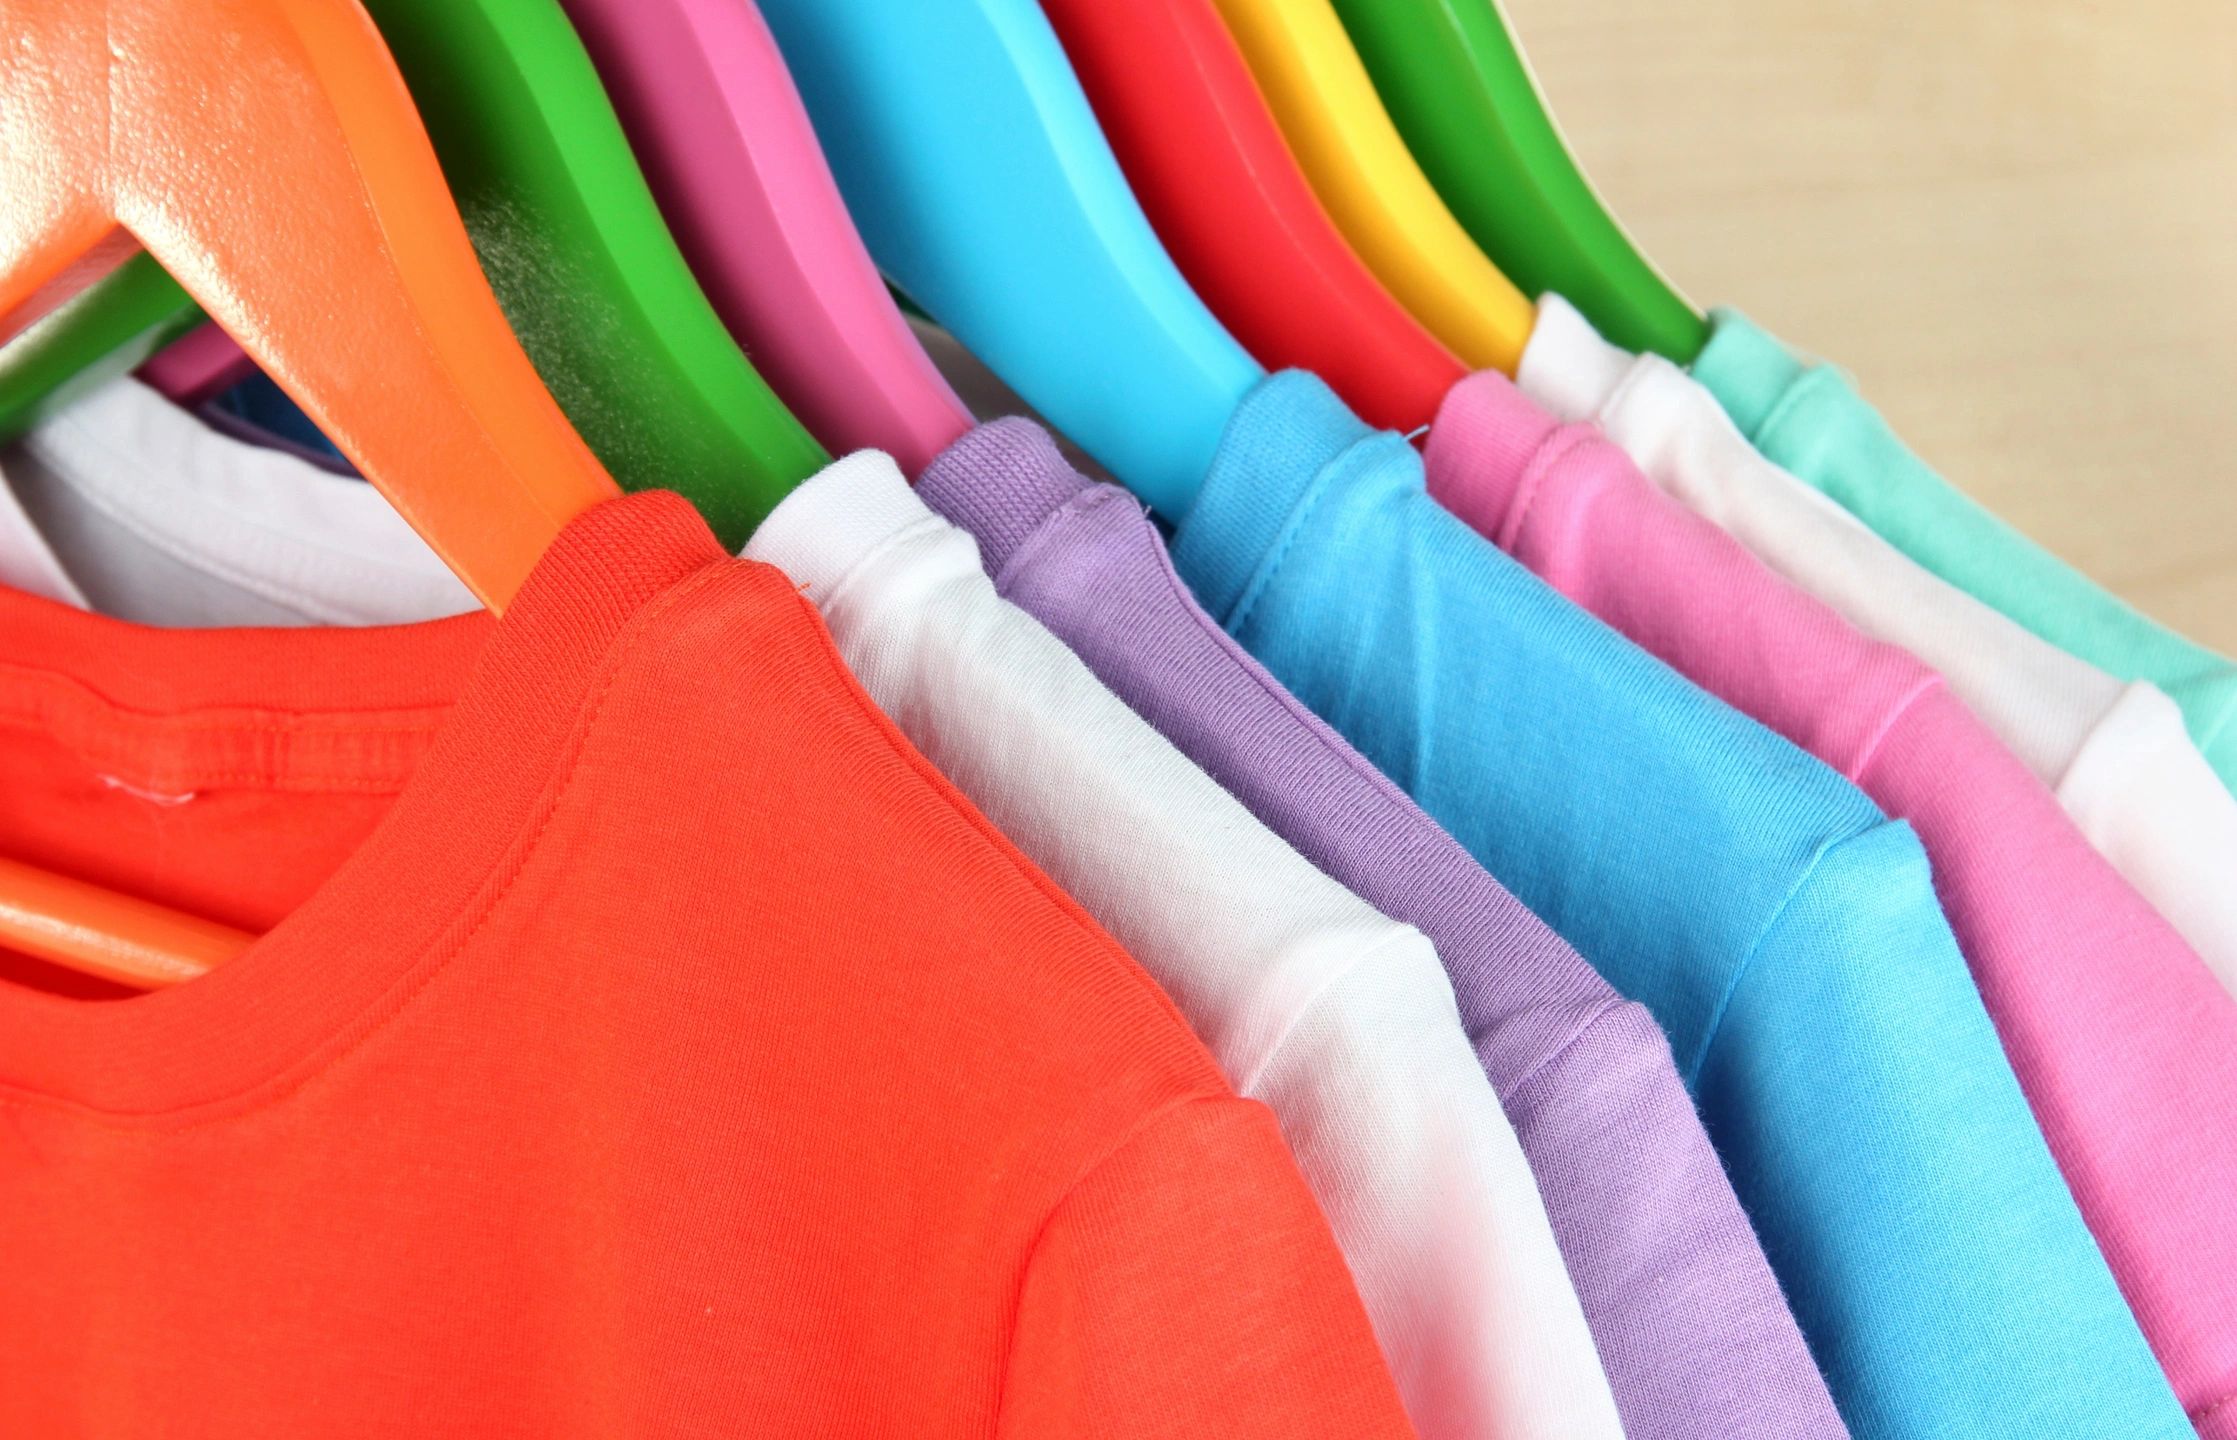 Cool tee shirts with bright colors